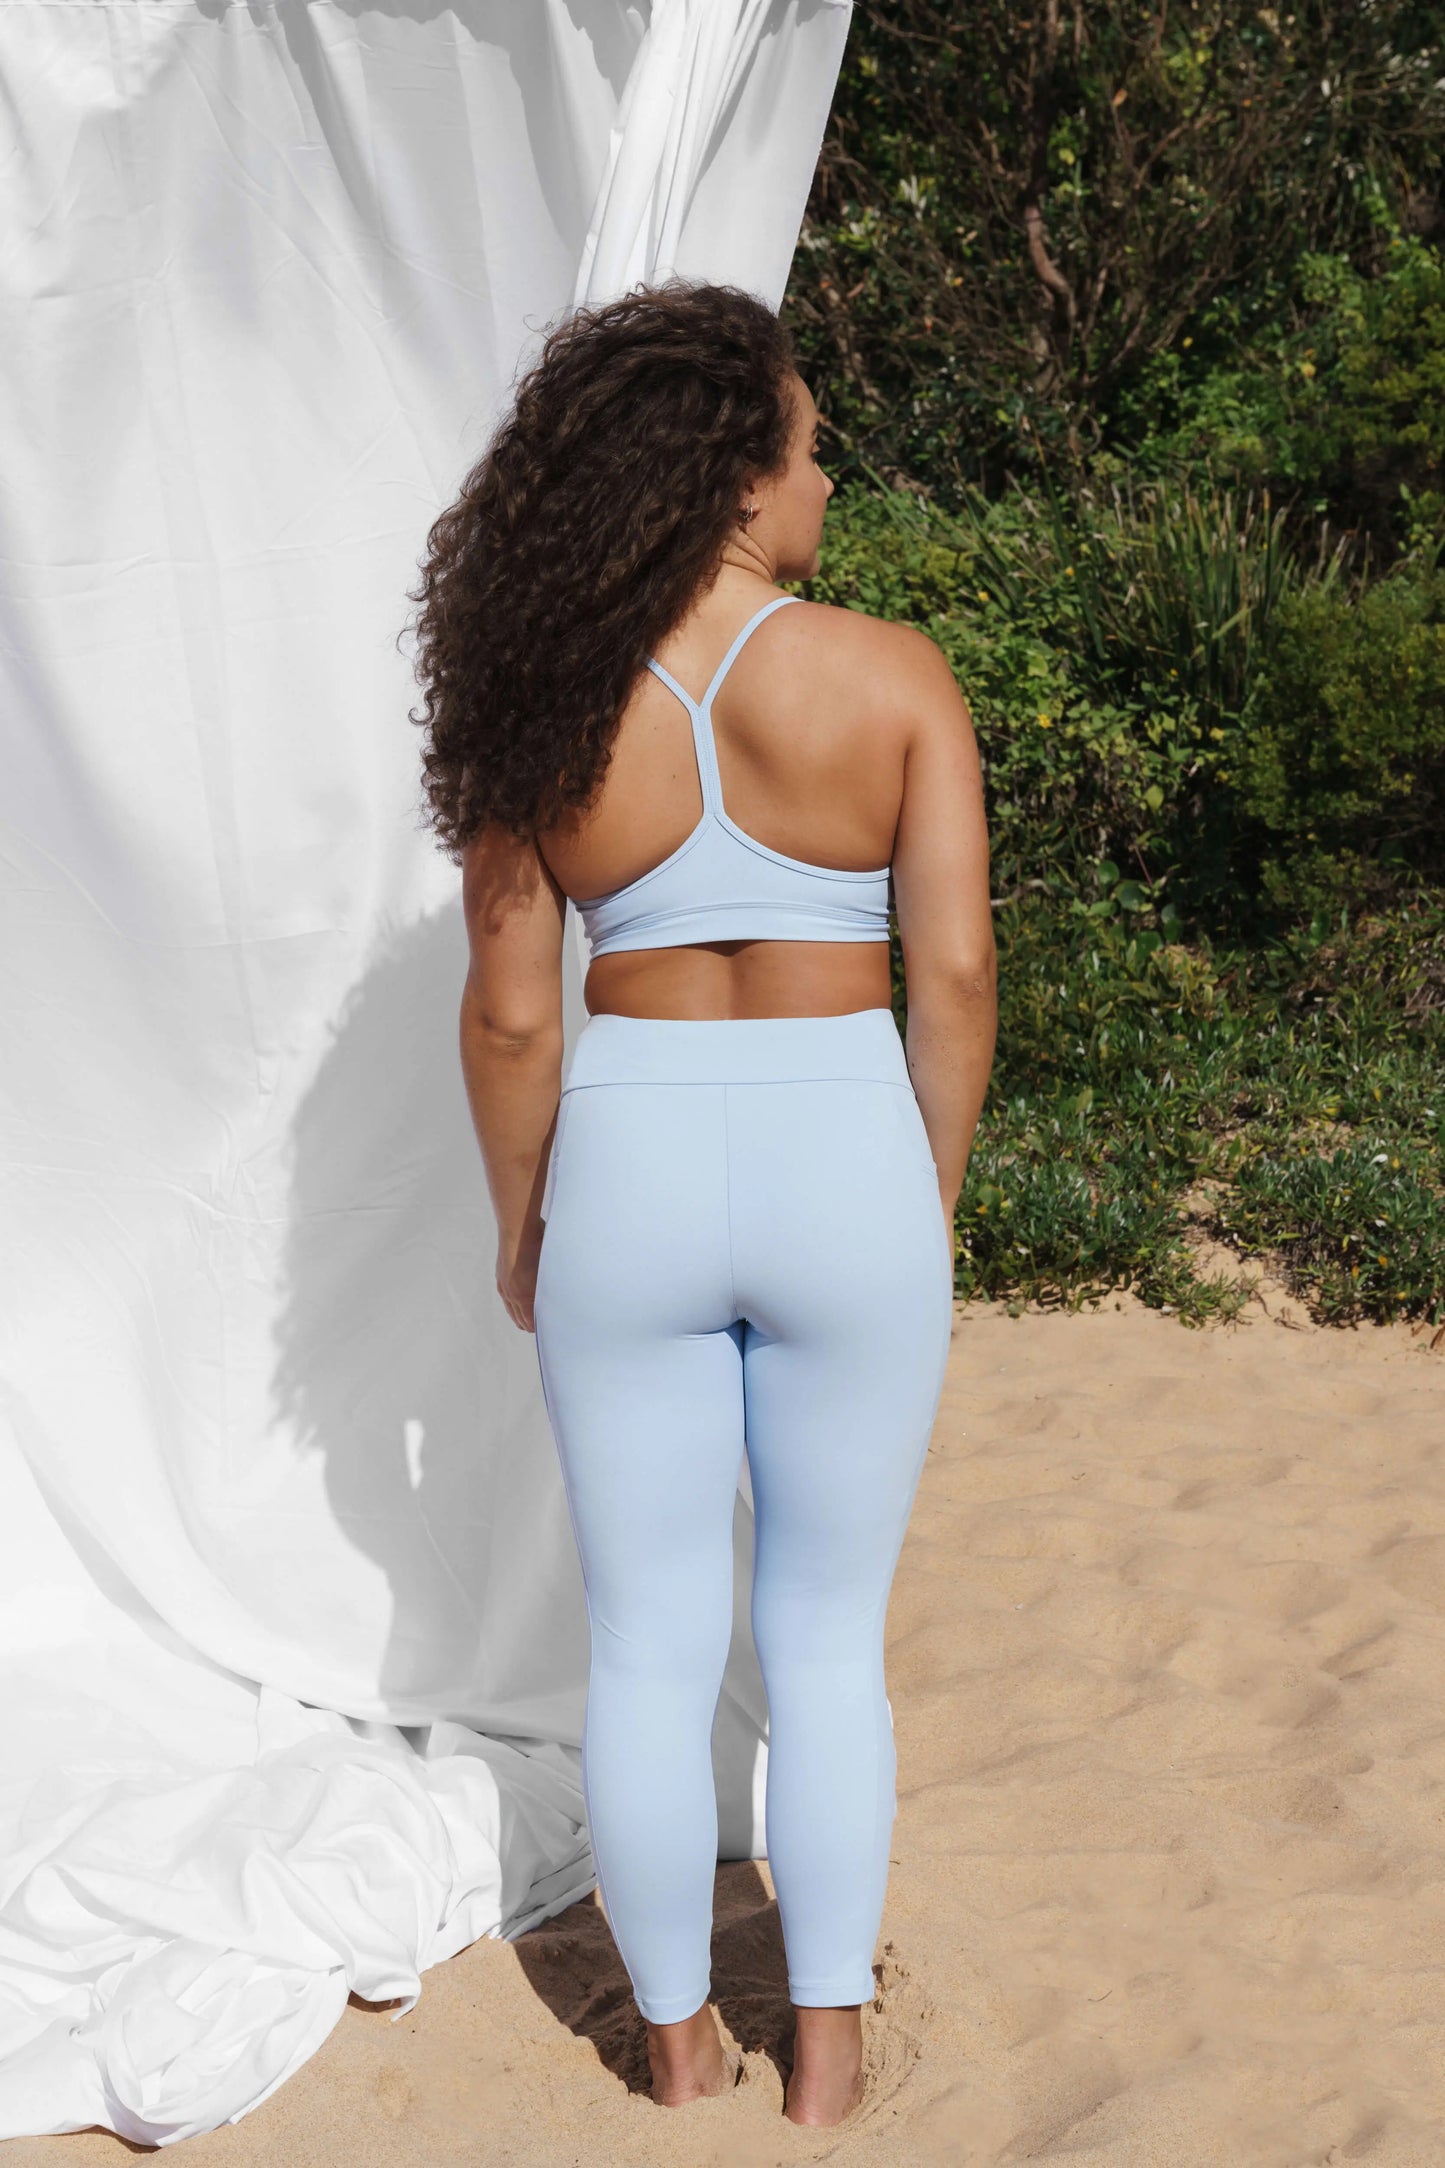 Our model at the beach, facing the back wearing a crystal Allawah legging and Inala crop top